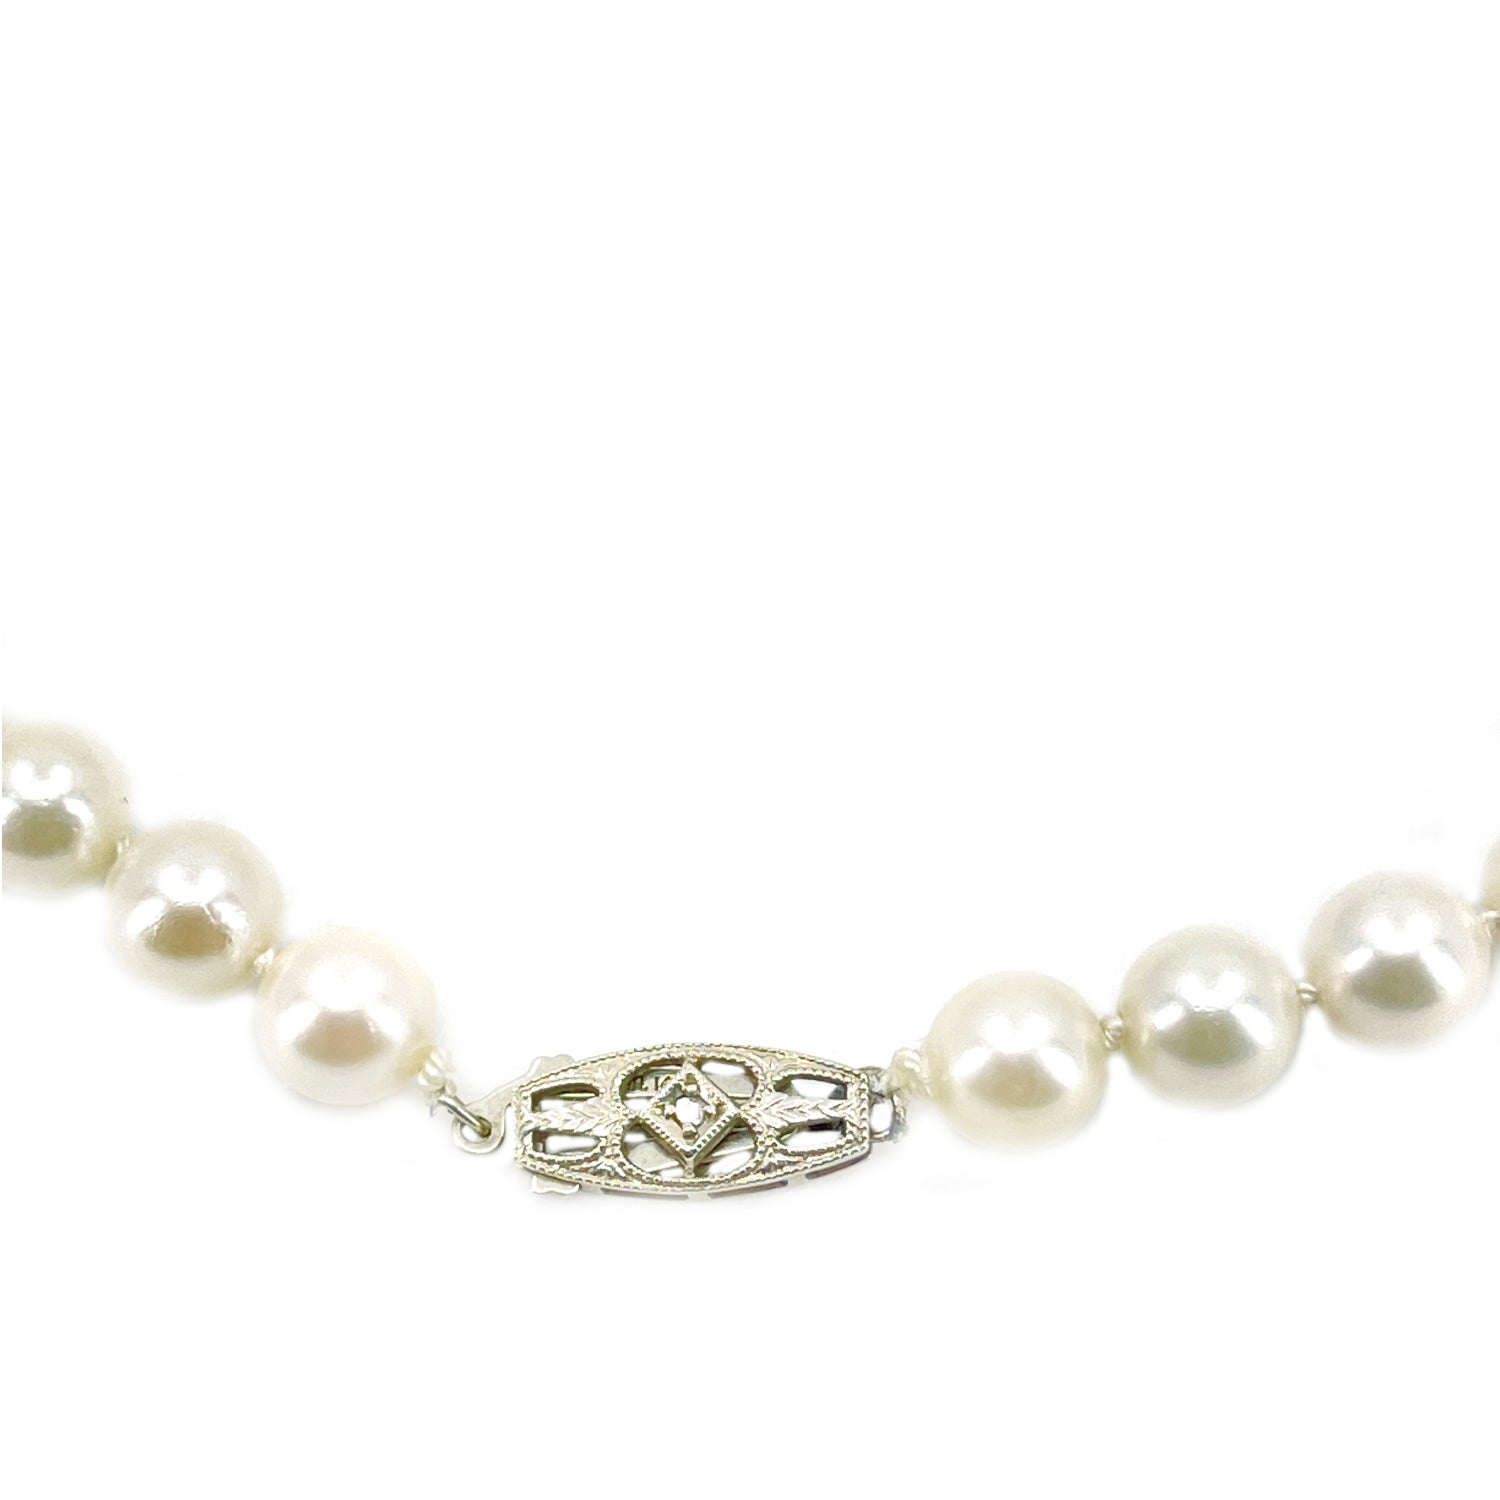 Art Nouveau Japanese Saltwater Cultured Akoya Pearl Necklace - 14K White Gold Diamond 18.25 Inch